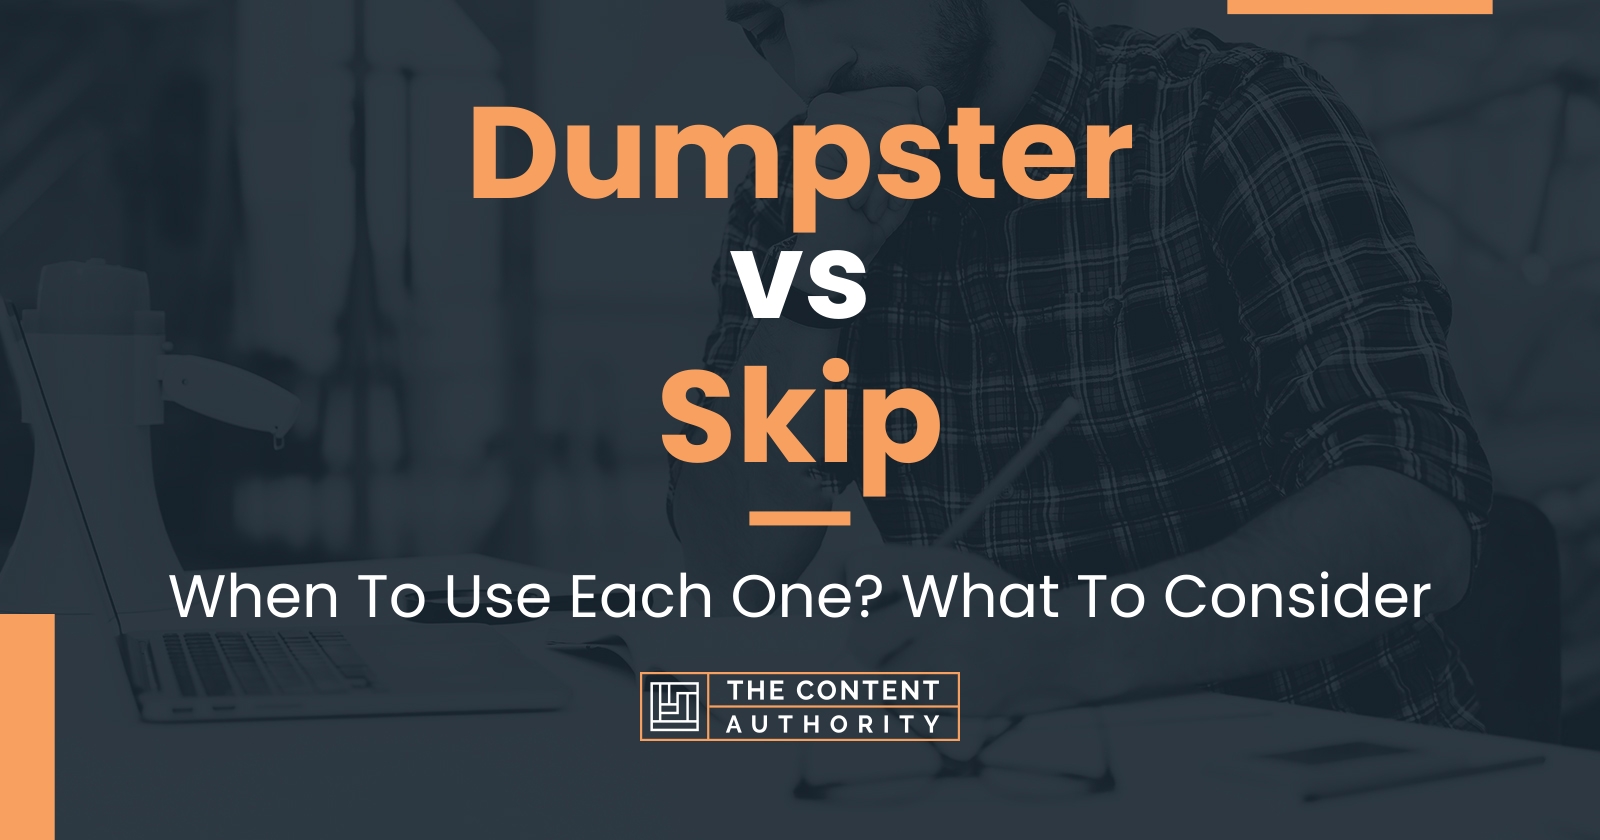 Dumpster vs Skip: When To Use Each One? What To Consider